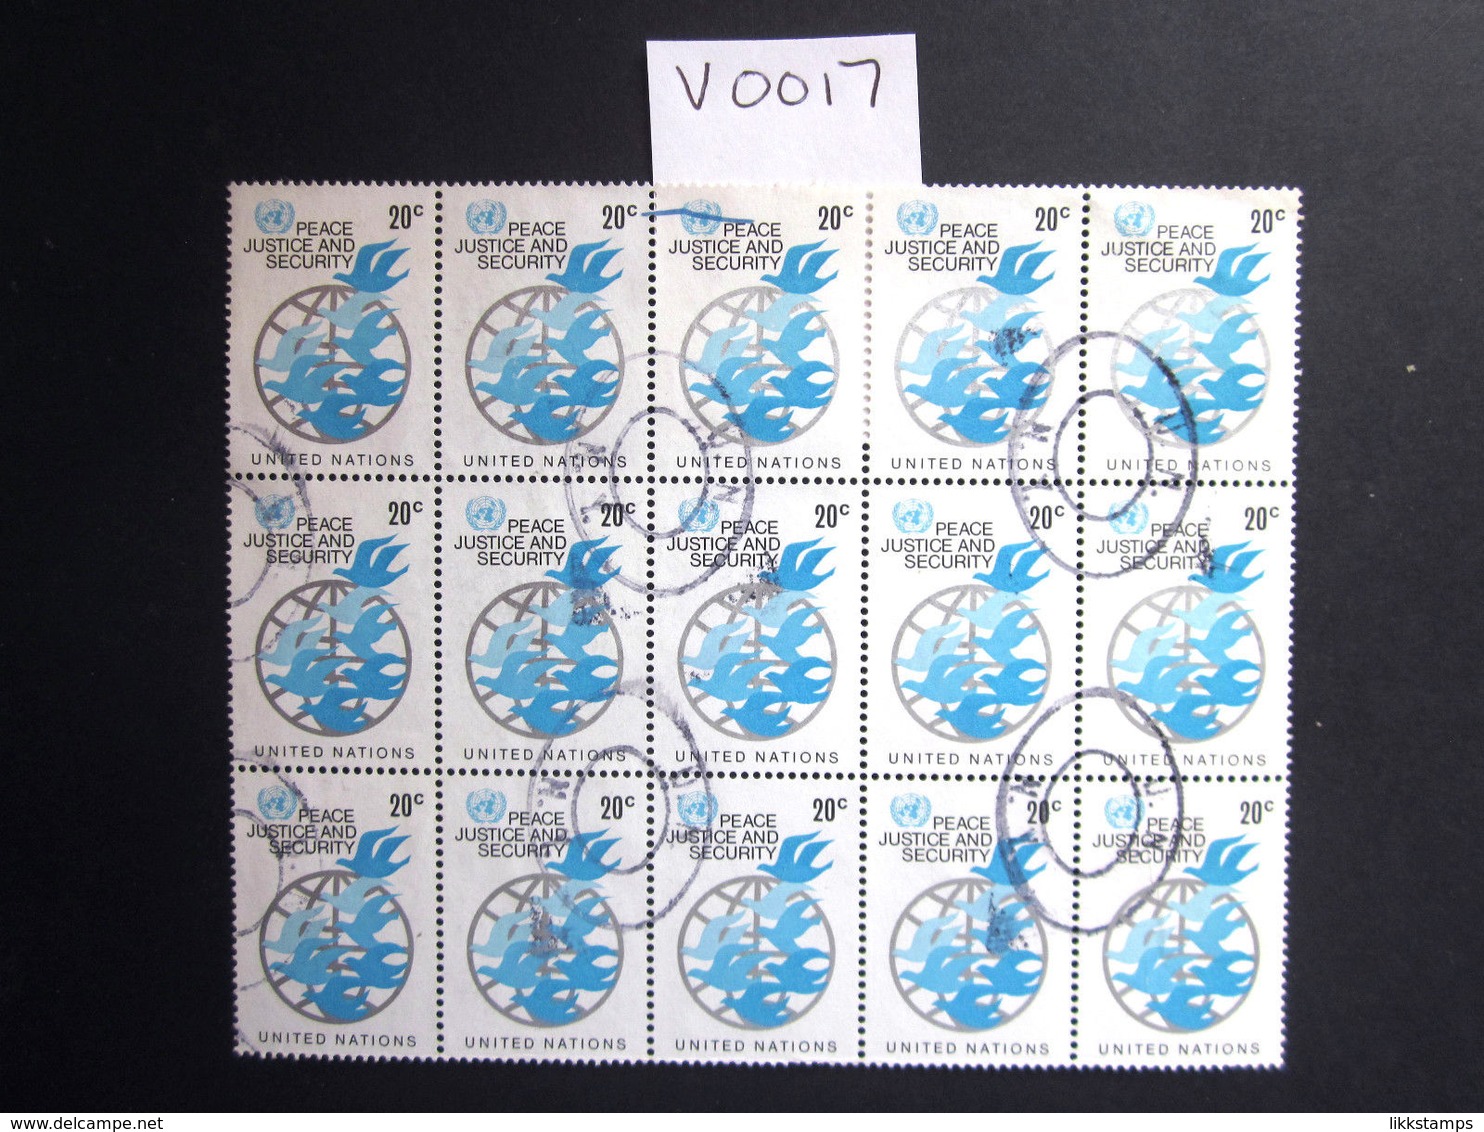 1979 FINE USED BLOCK OF 15 "SG 316" PICTORIAL UNITED NATIONS USED STAMPS. ( V0017 ) #00345 - Collections, Lots & Séries